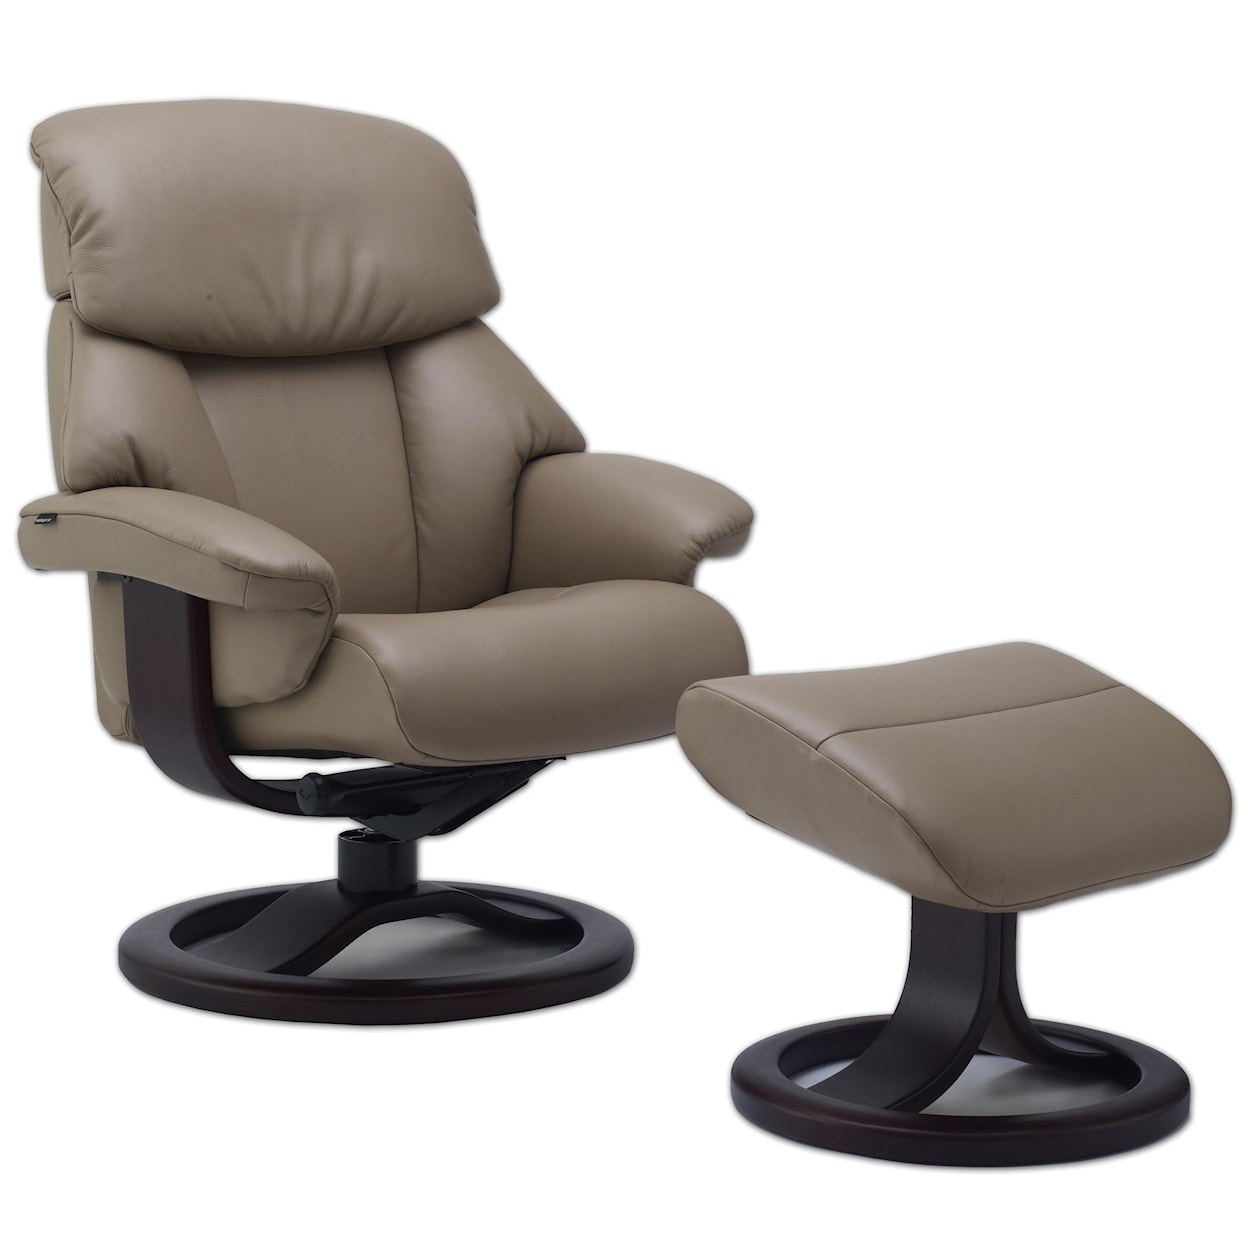 Fjords by Hjellegjerde Alfa 520 Small Recliner and Ottoman Set